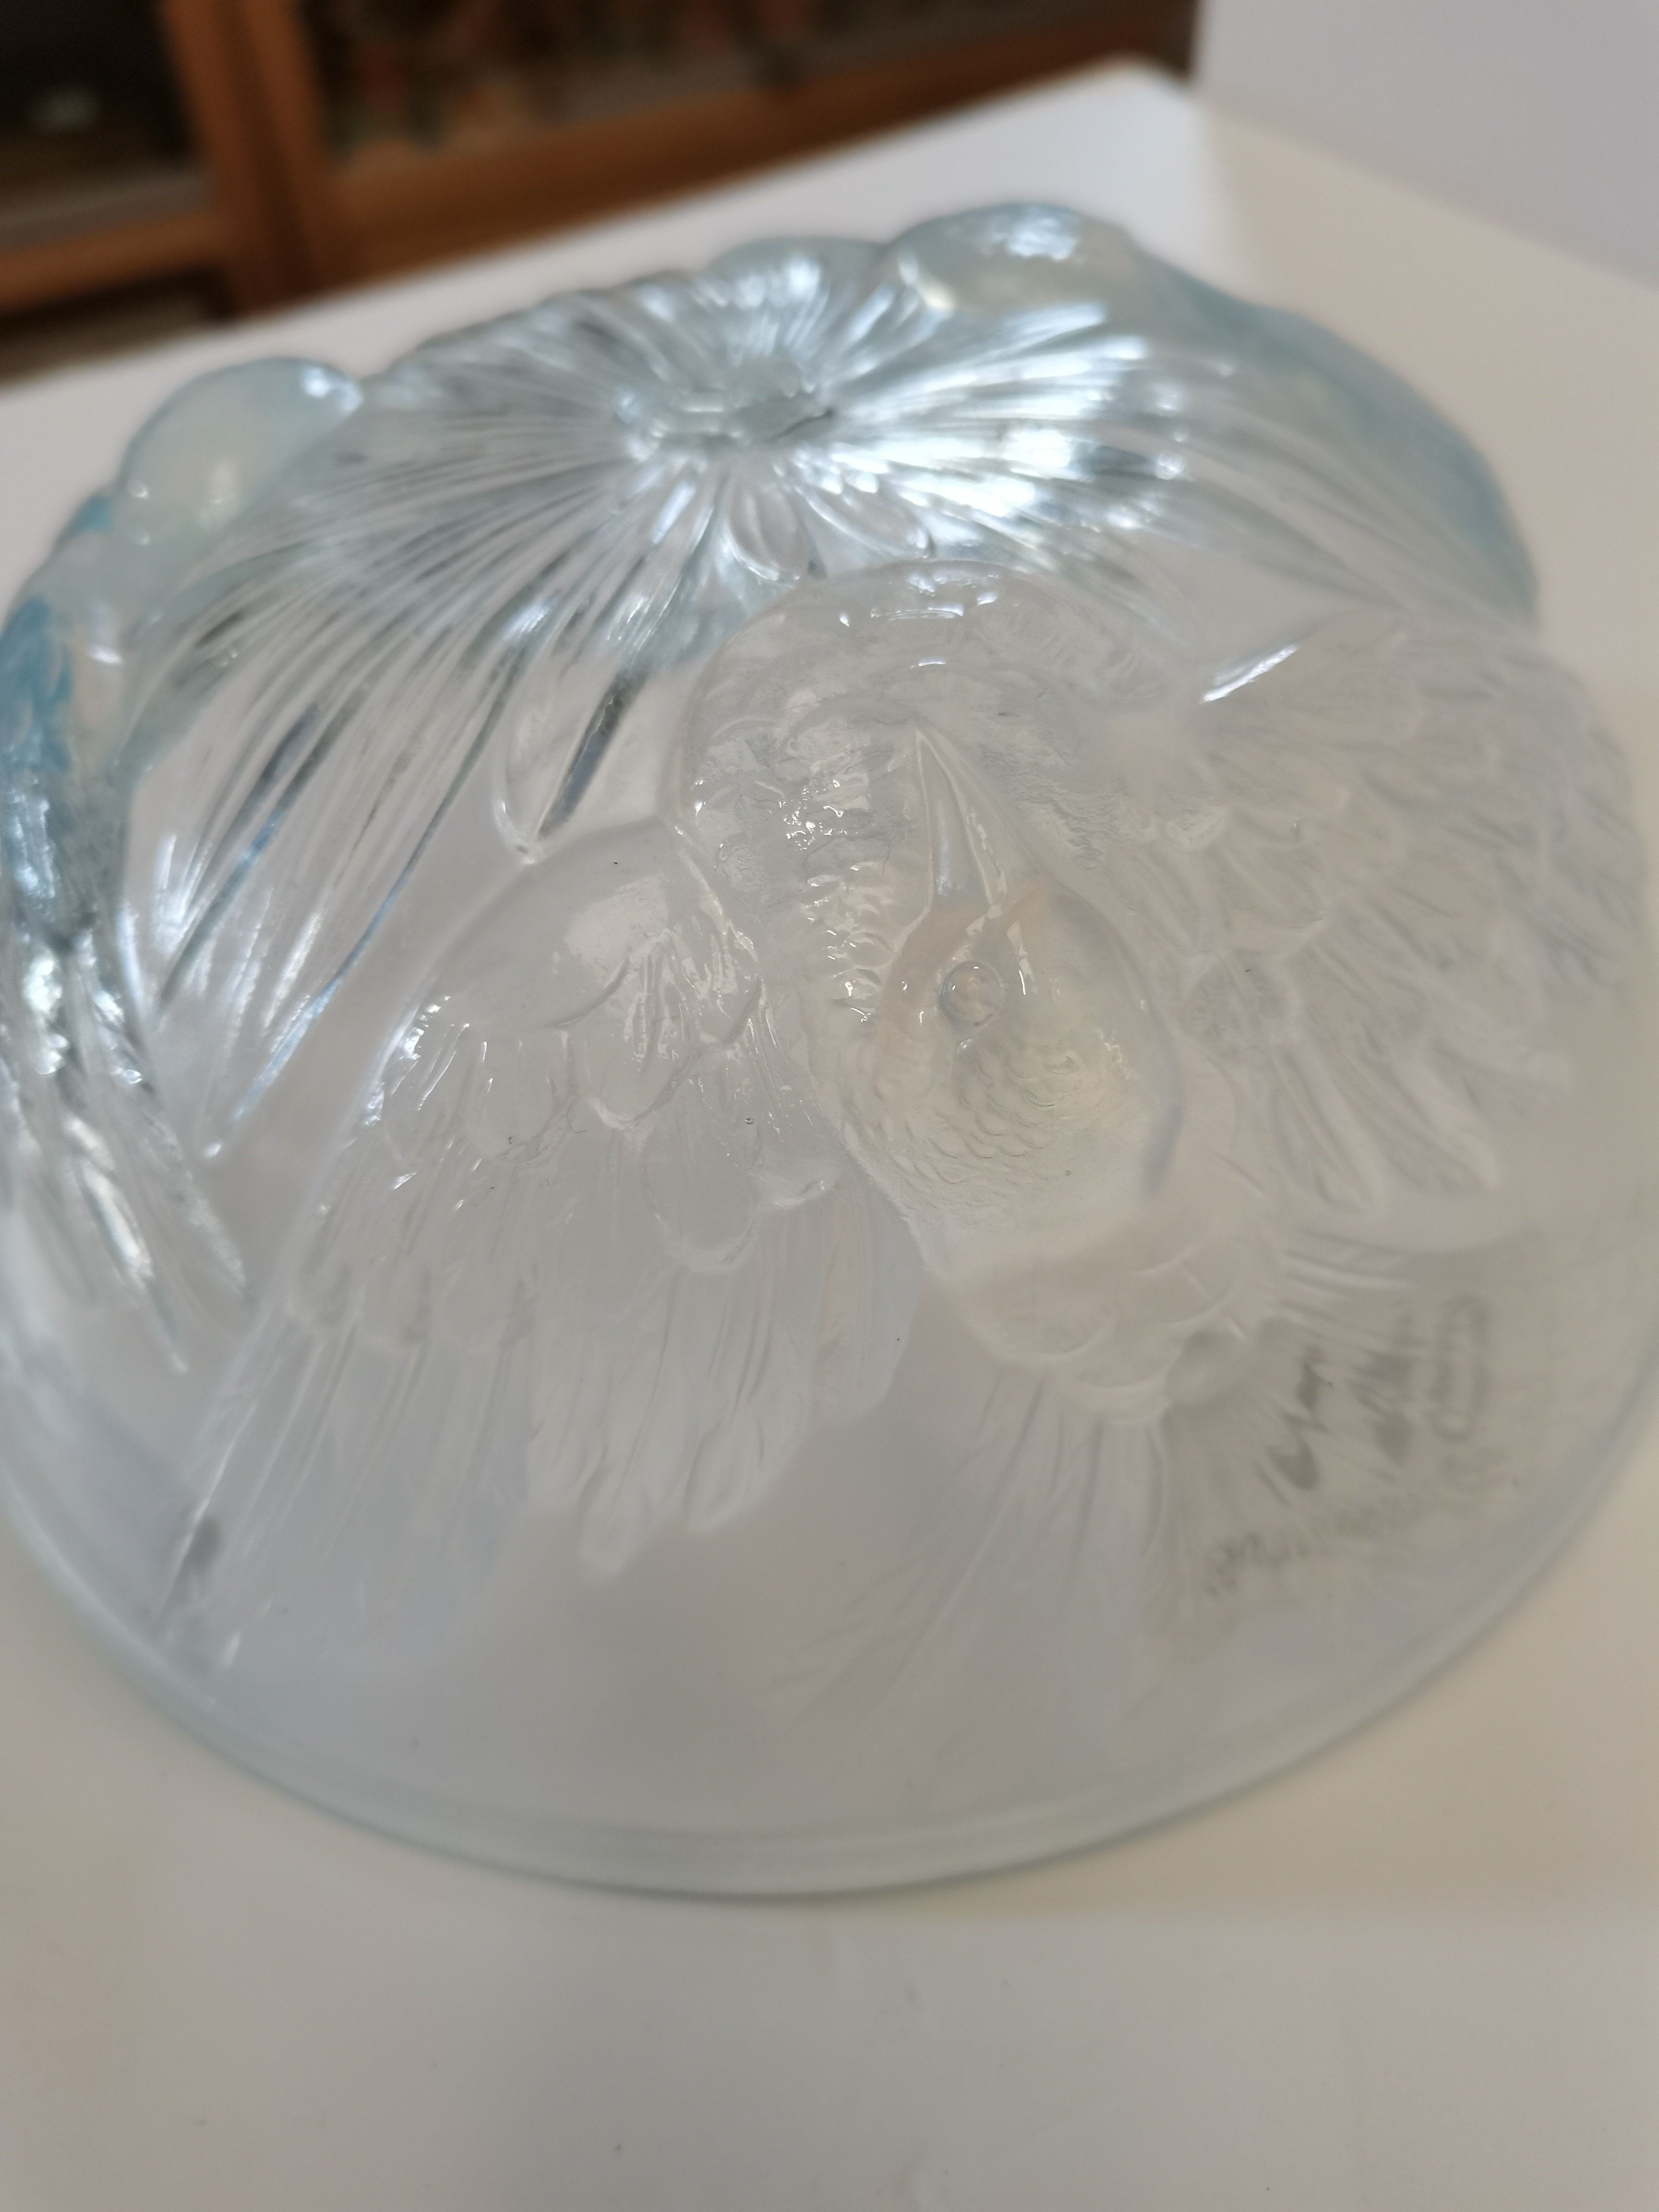 Lalique/Jobling Opalescent bowl - excellent condition - Image 5 of 6